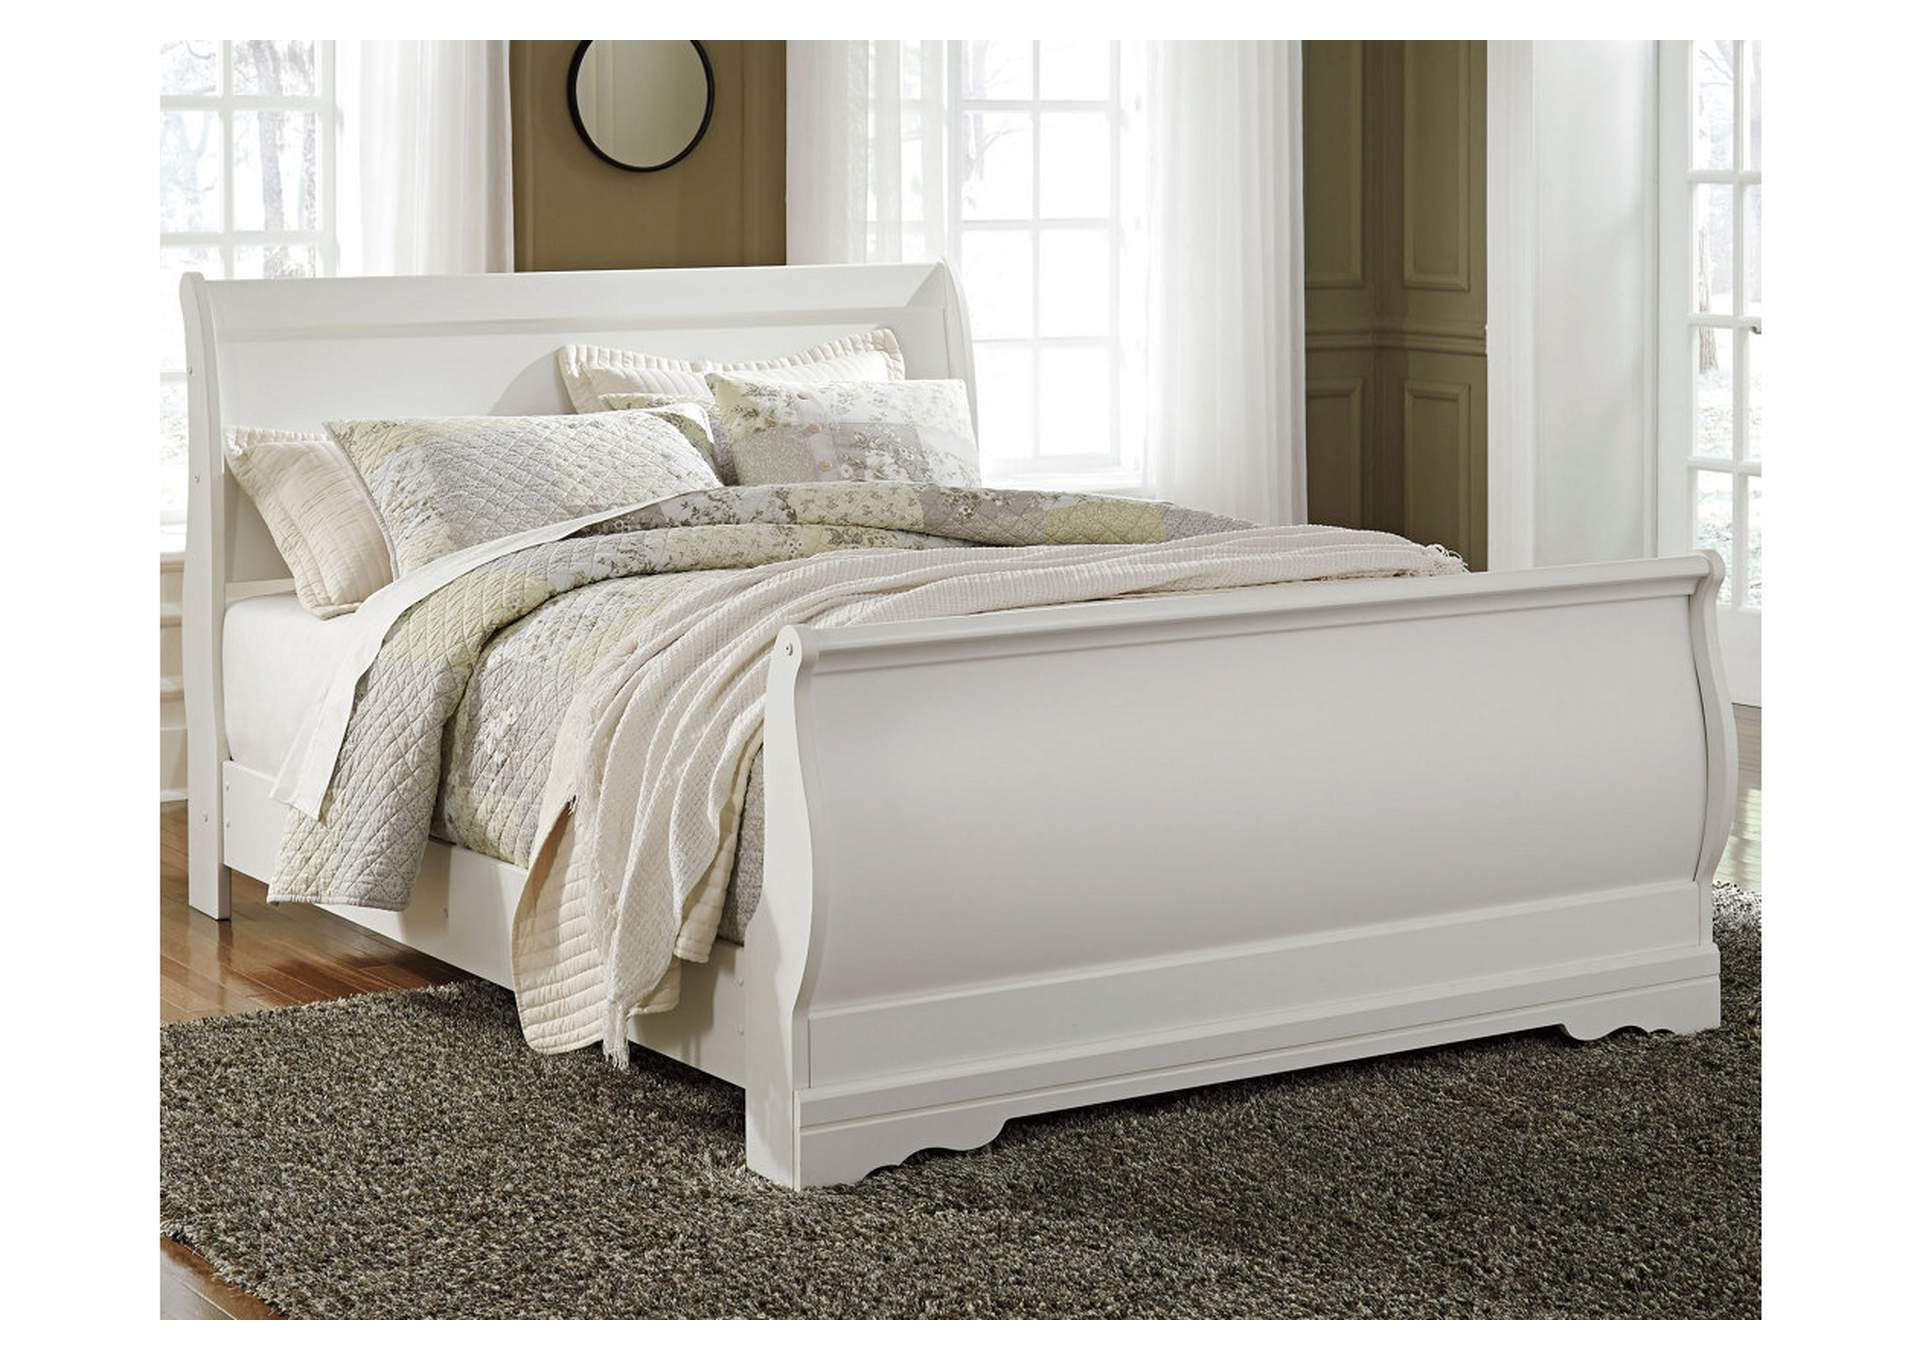 Anarasia Queen Sleigh Bed,Signature Design By Ashley